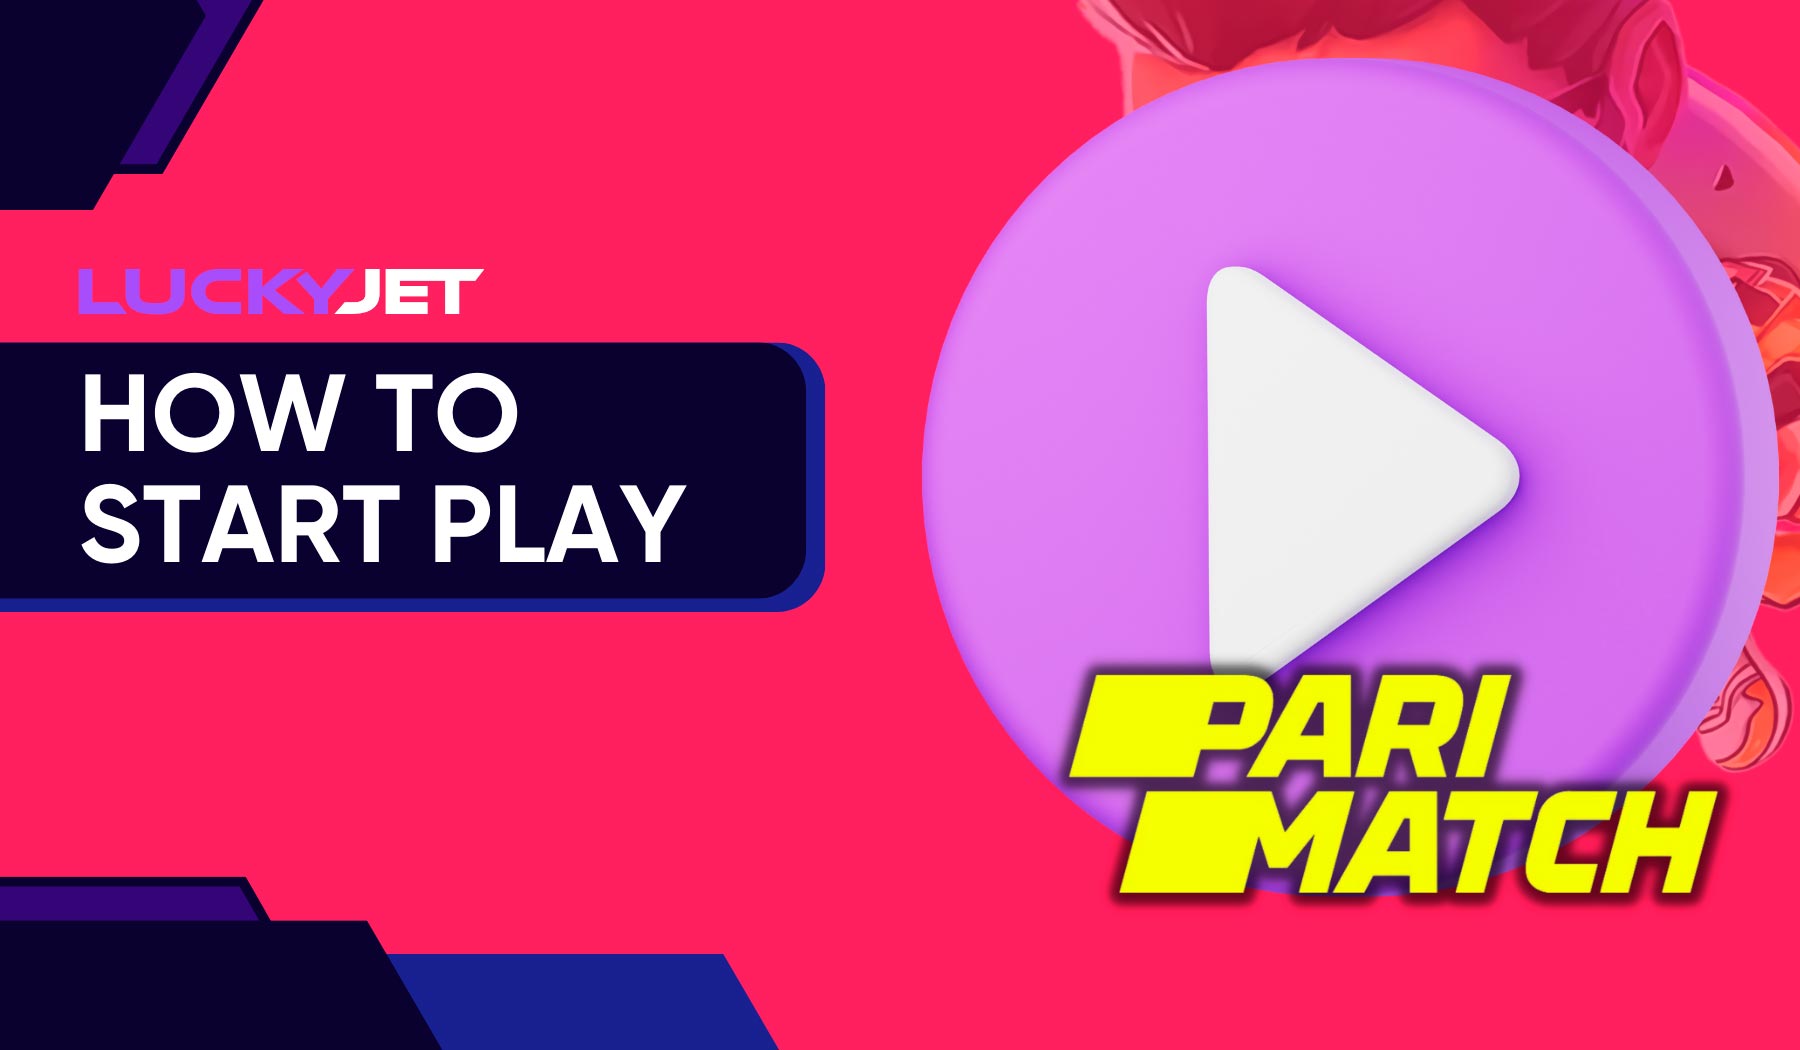 Getting started playing Lucky Jet on Parimatch